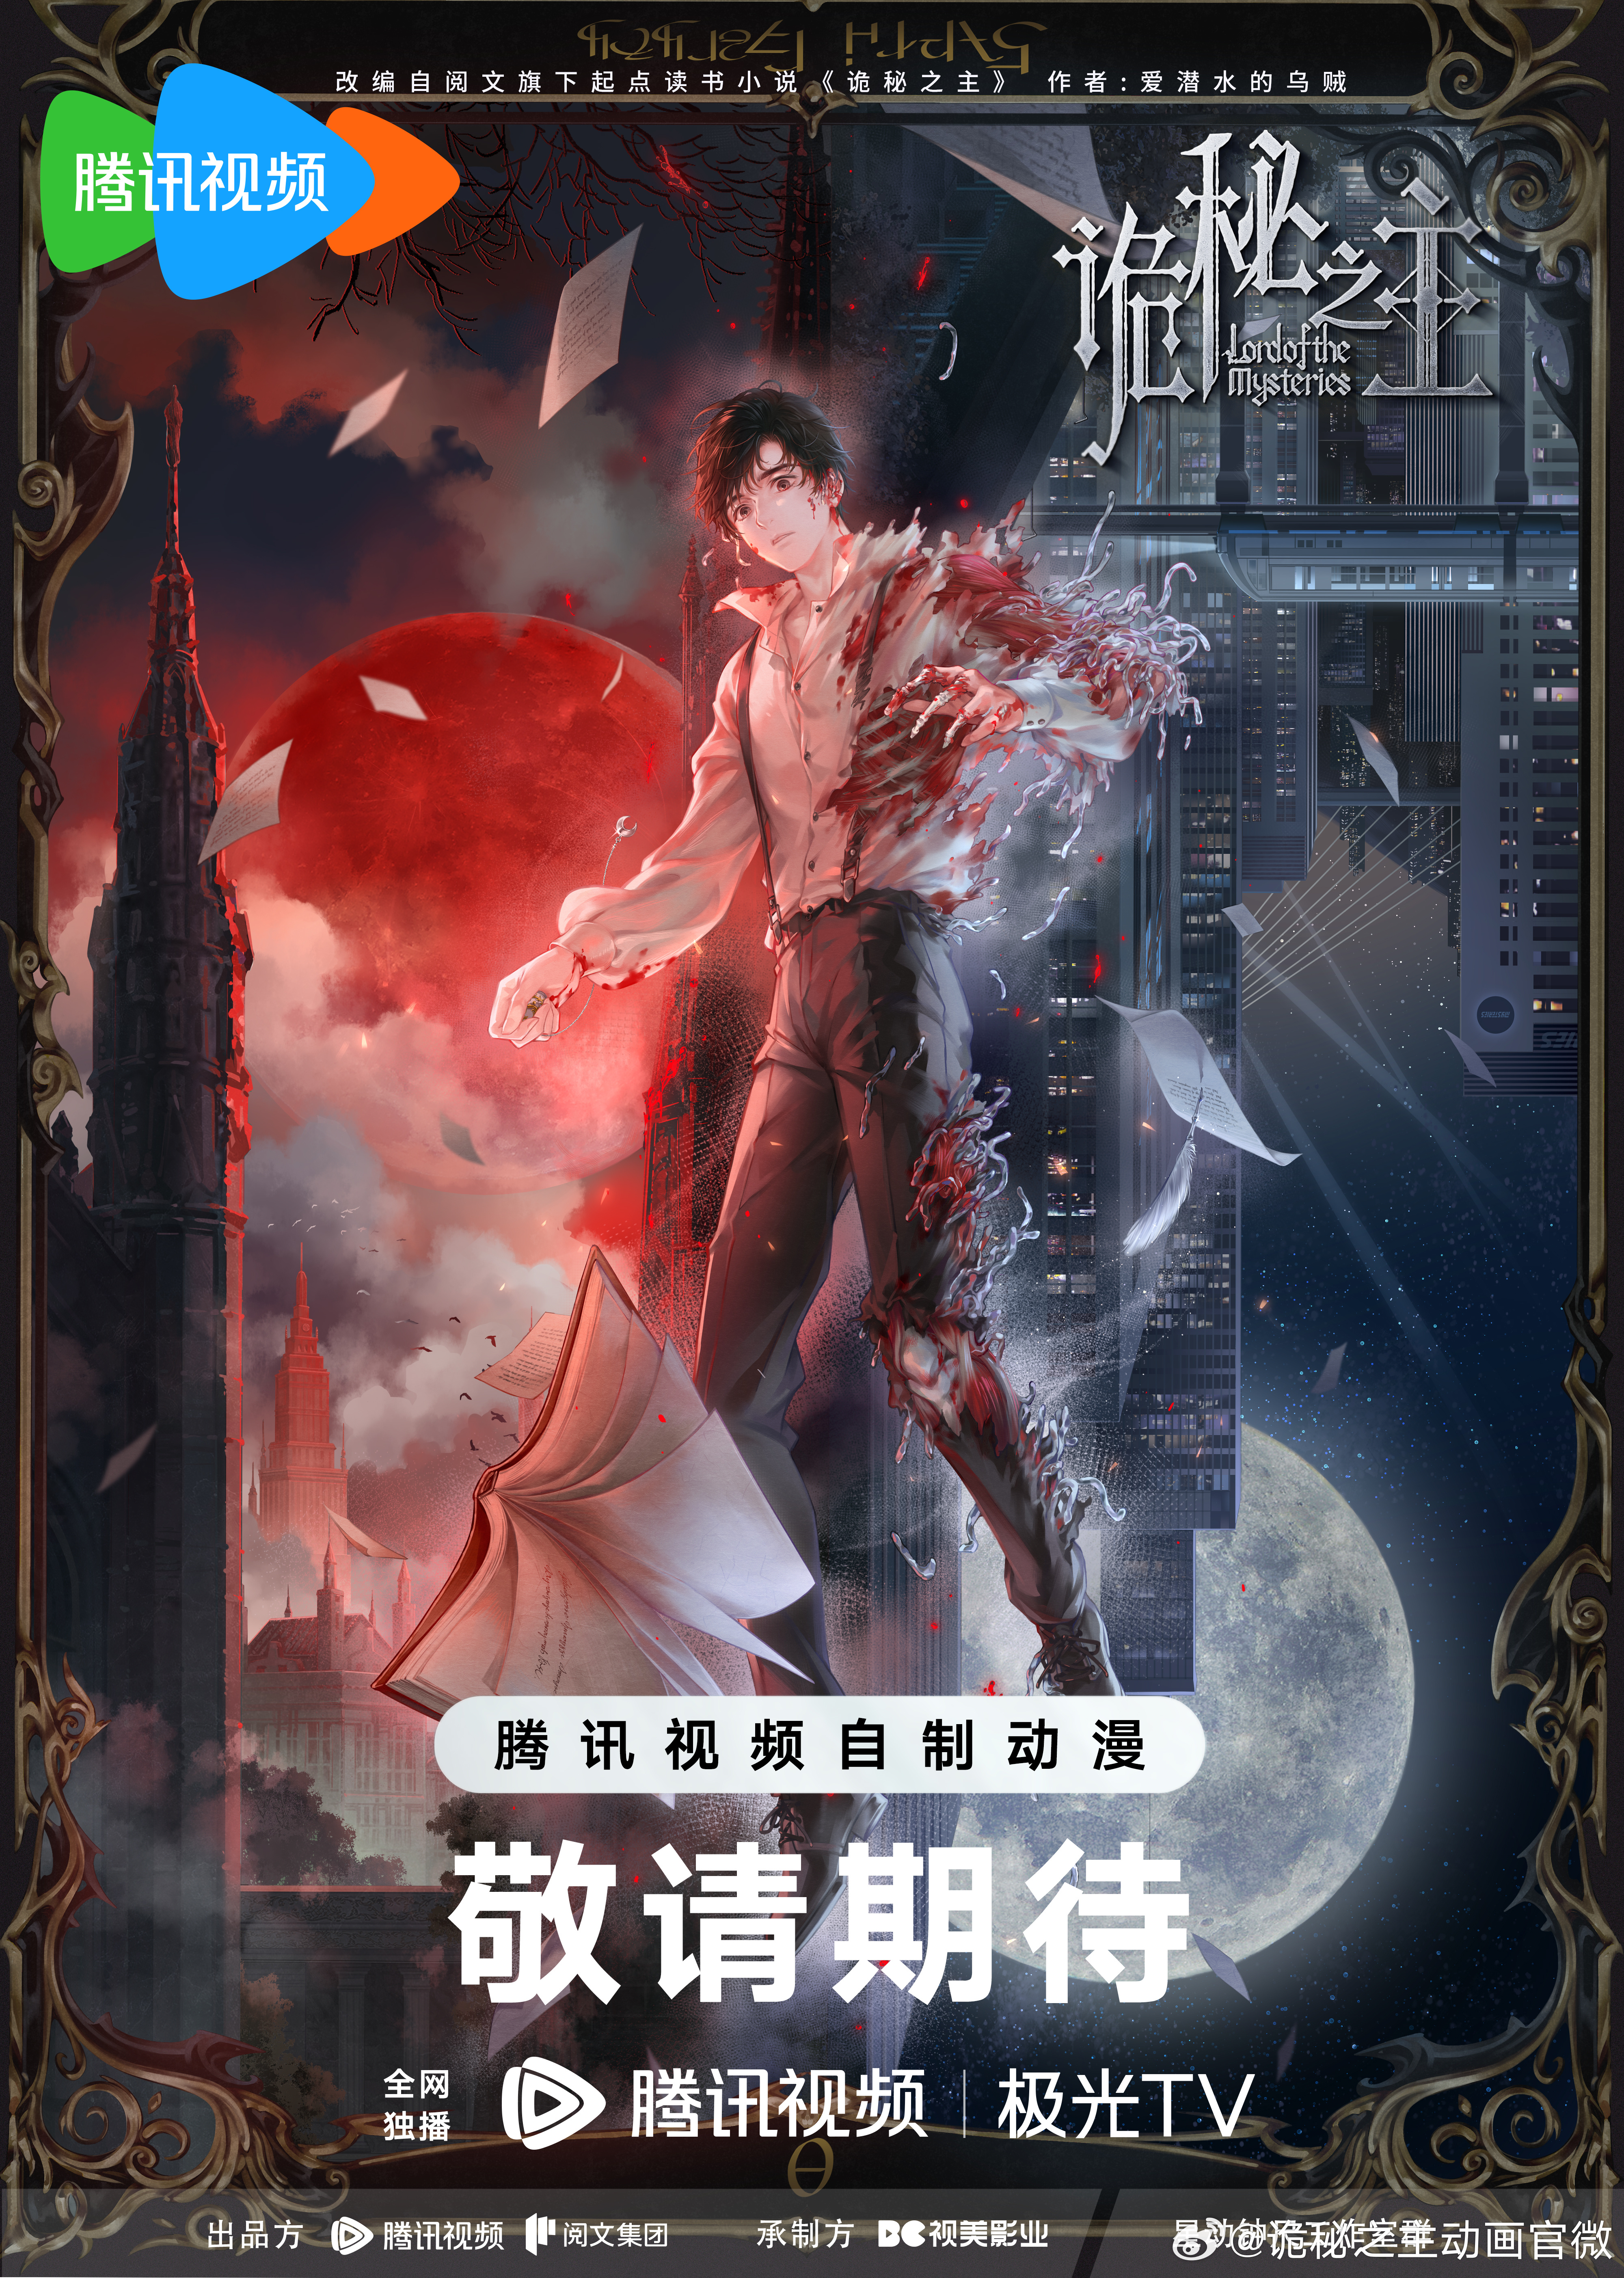 Lucifer Donghua - Watch Donghua/Anime Online In English Subtitles